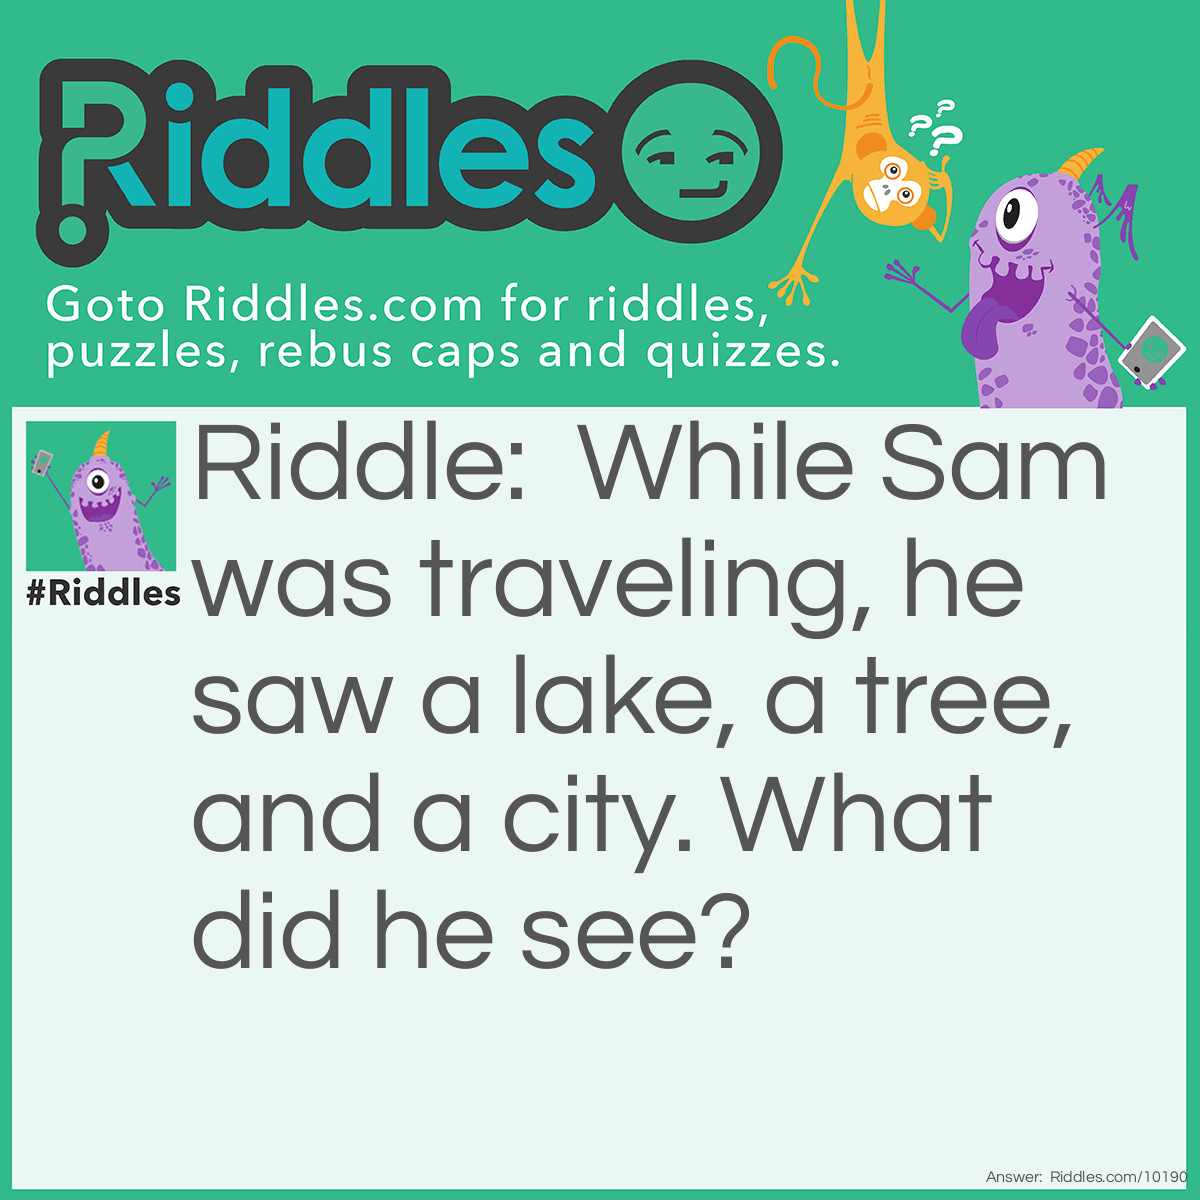 Riddle: While Sam was traveling, he saw a lake, a tree, and a city. What did he see? Answer: Electricity.